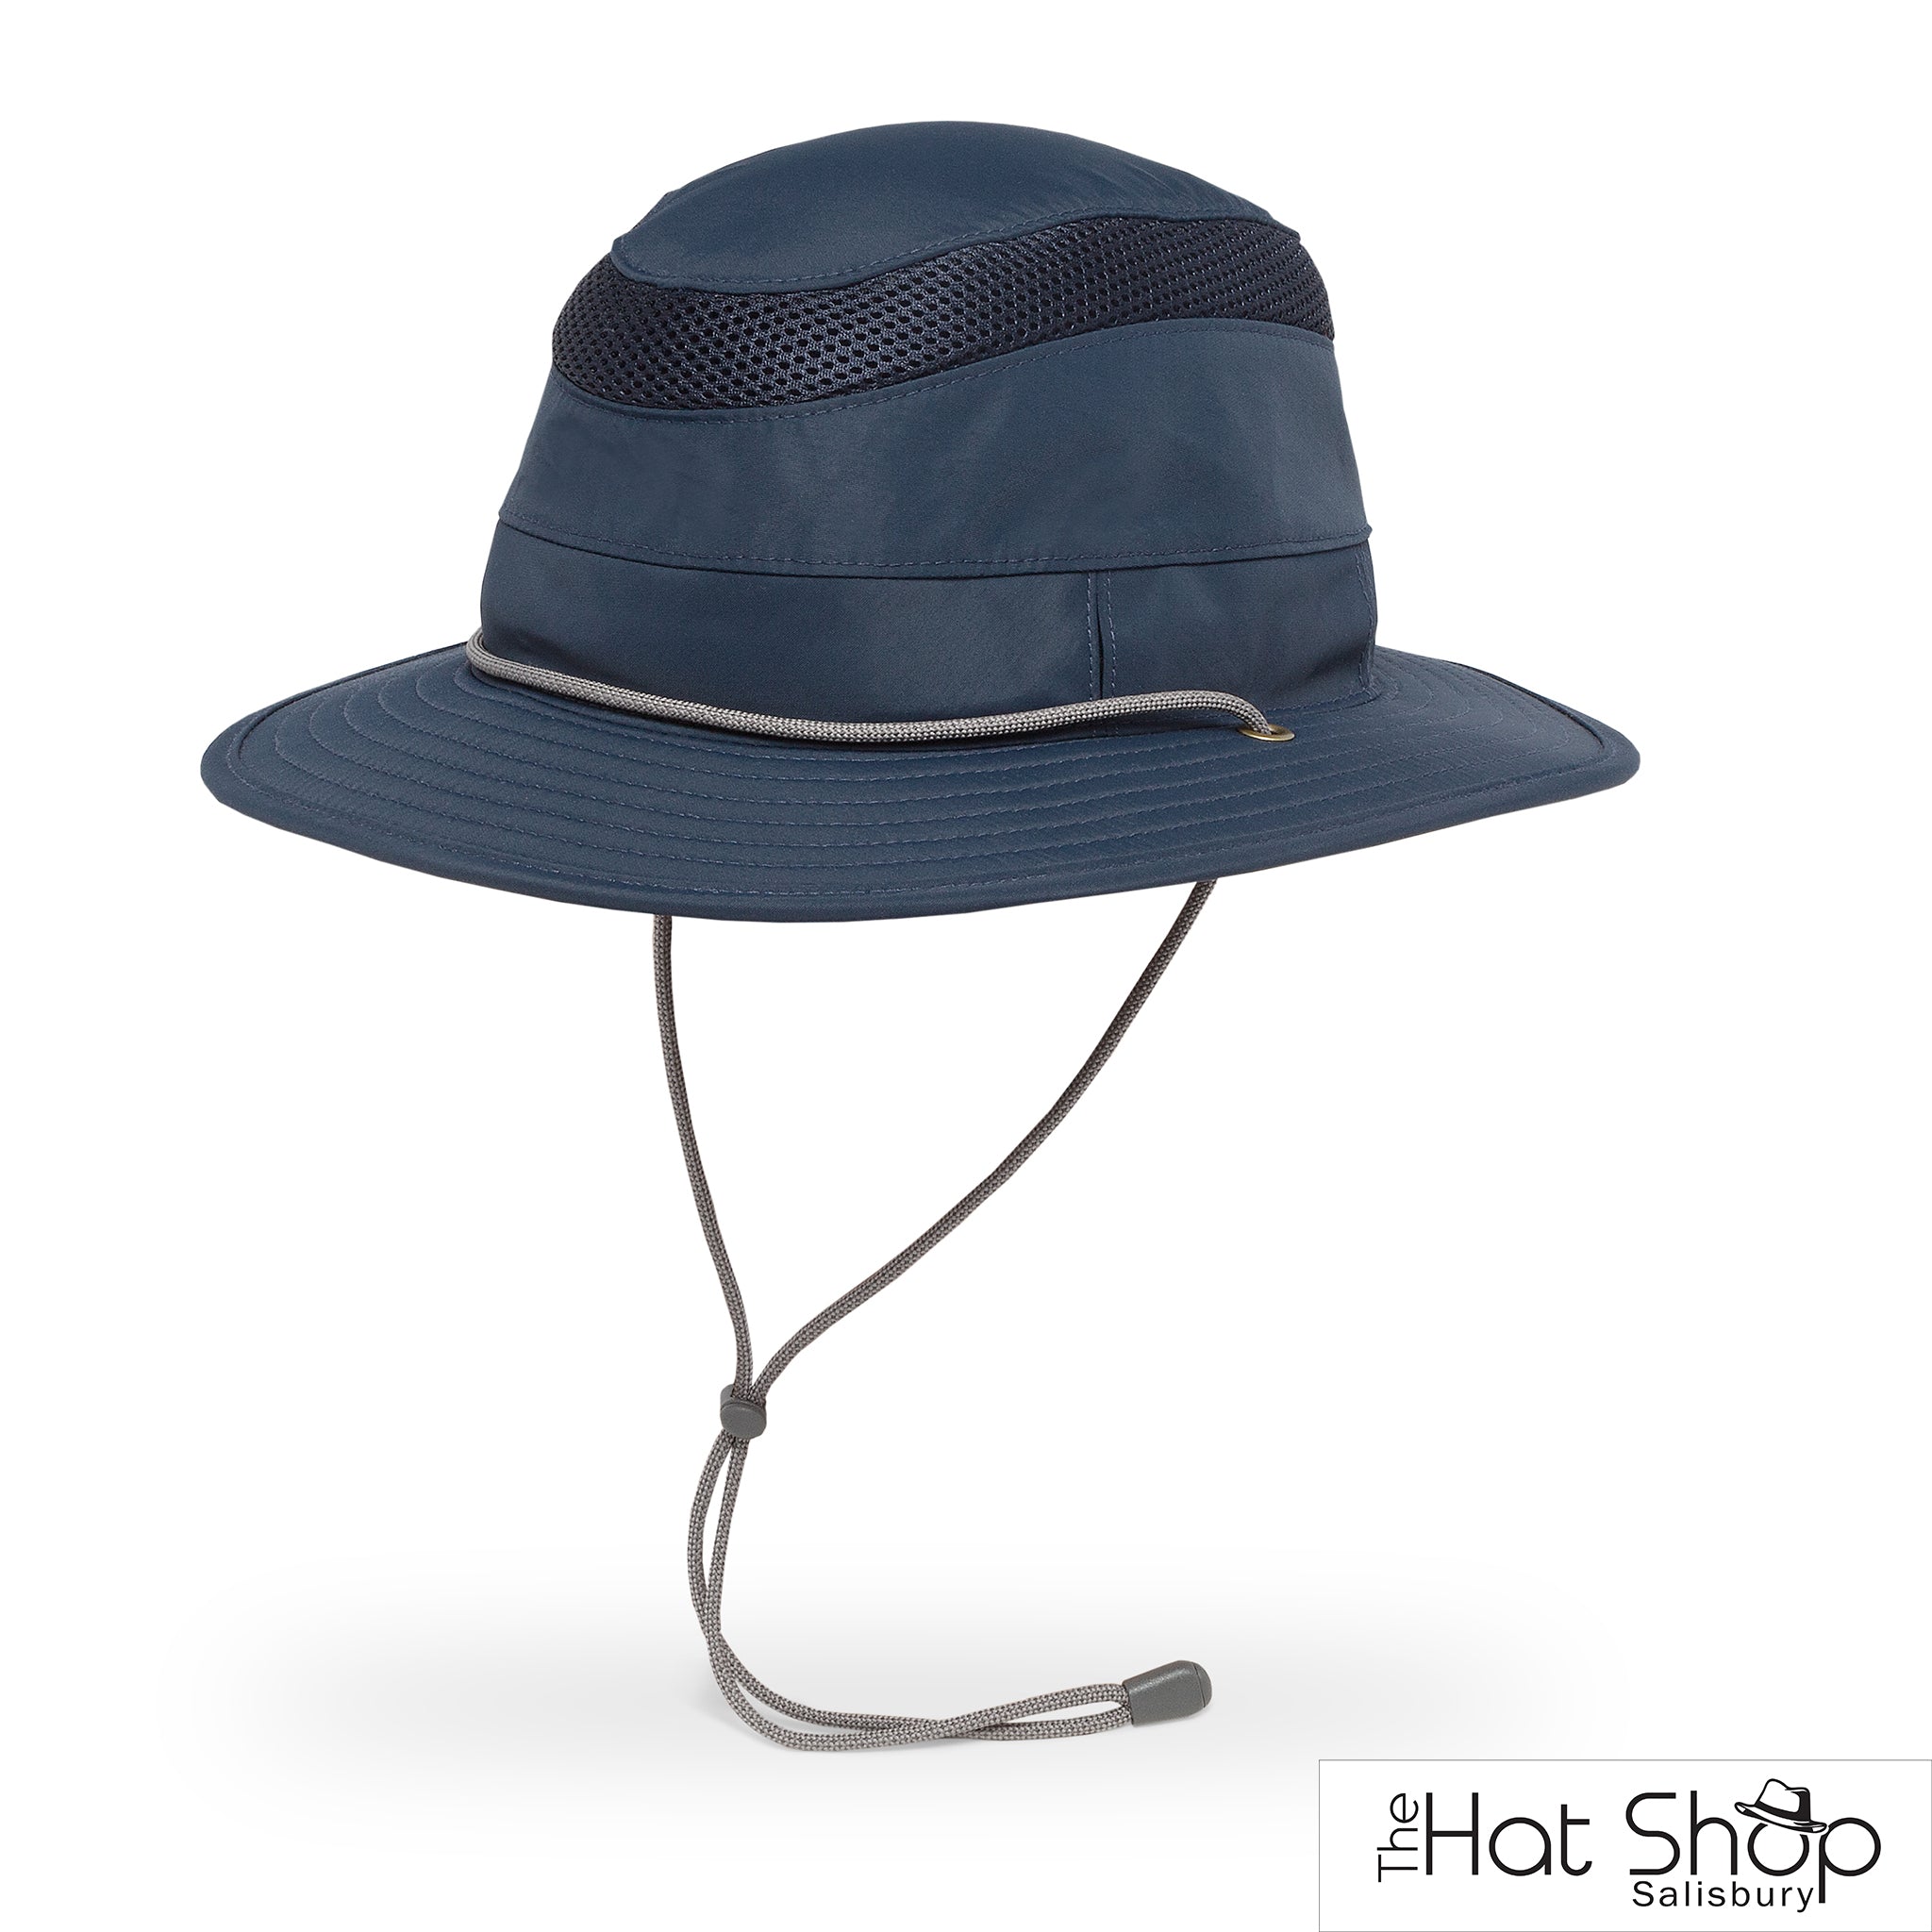 The Hat Shop Sunday Afternoon Charter Escape Hat Navy